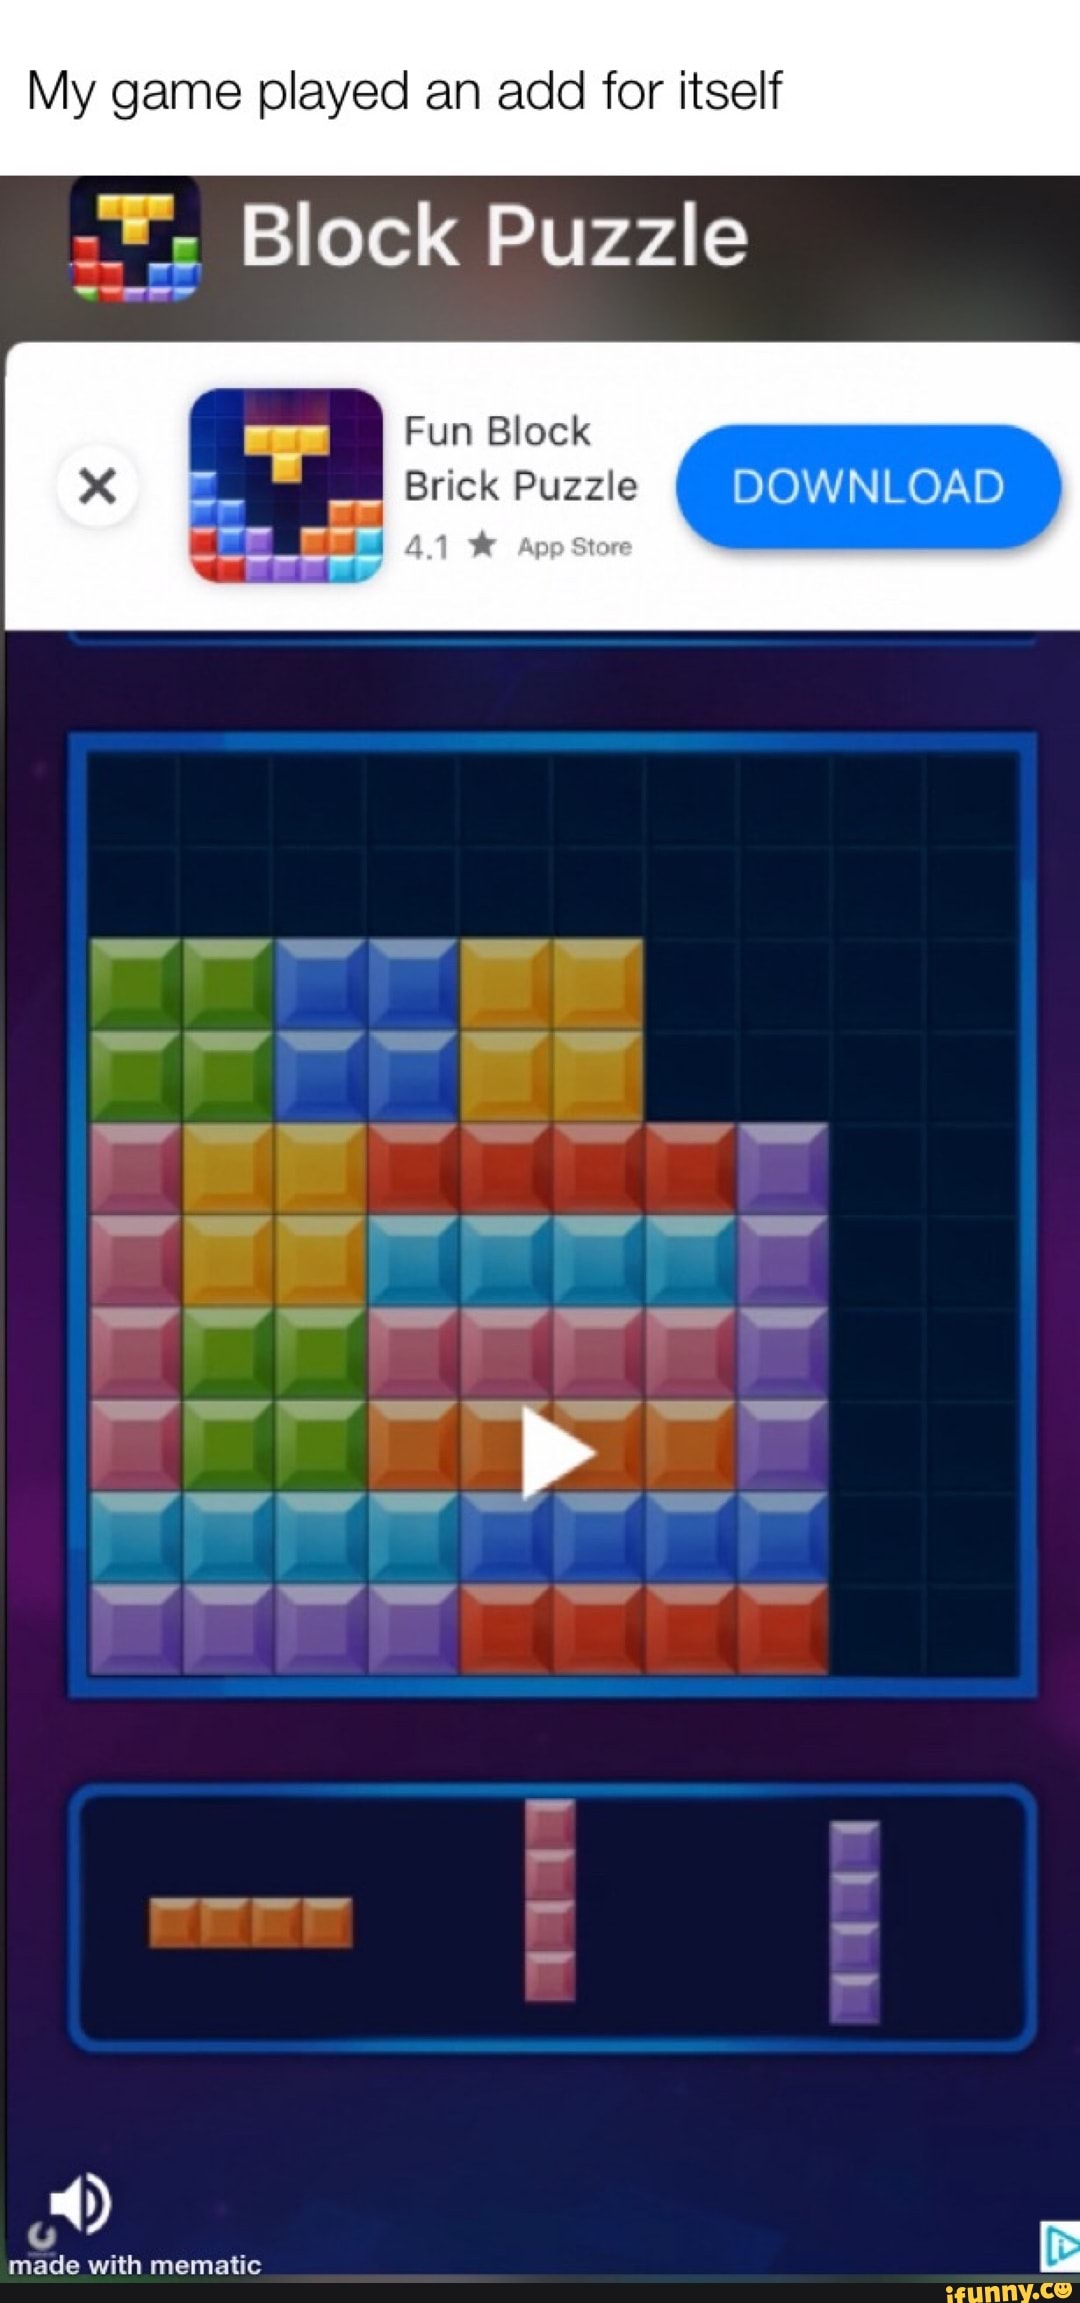 download the new version for ios Blocks: Block Puzzle Games